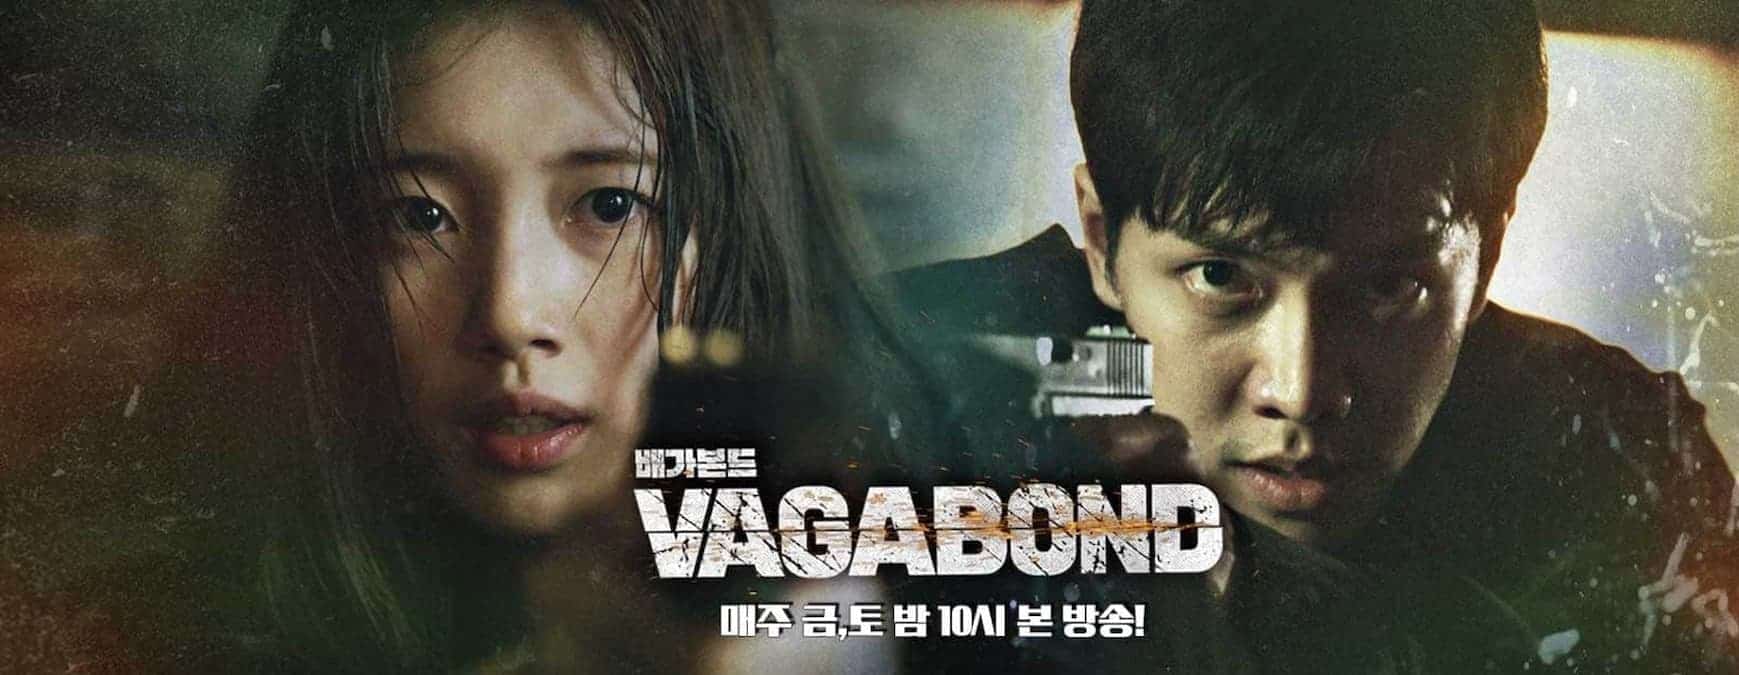 romersk grube syndrom Vagabond Season 2: Release Date + Cast and Plot • The Awesome One